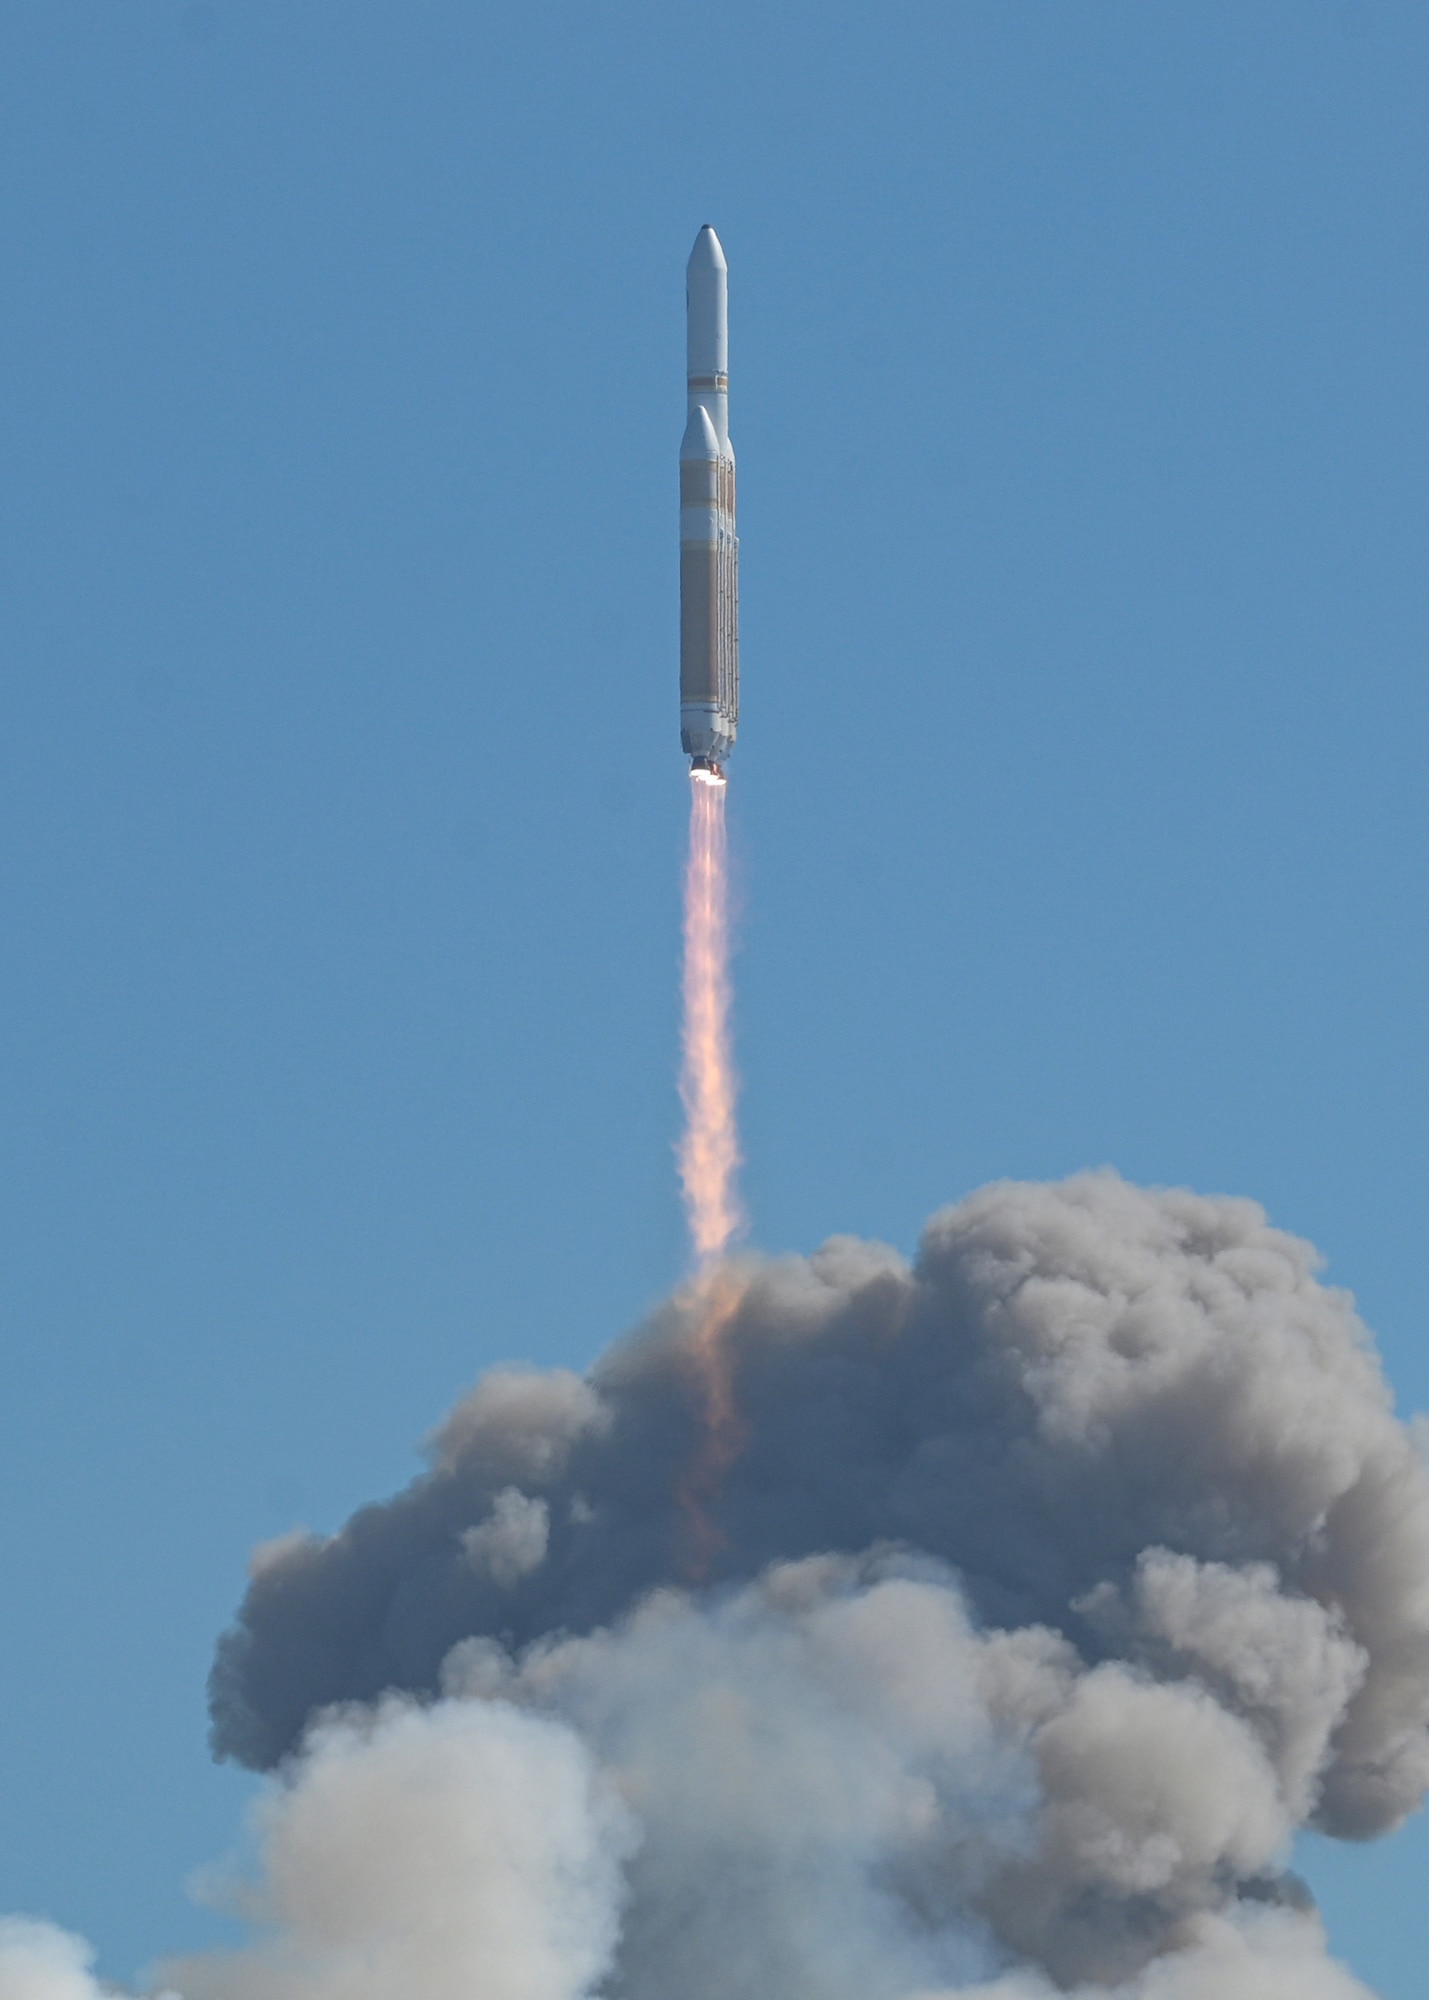 A rocket goes into the sky